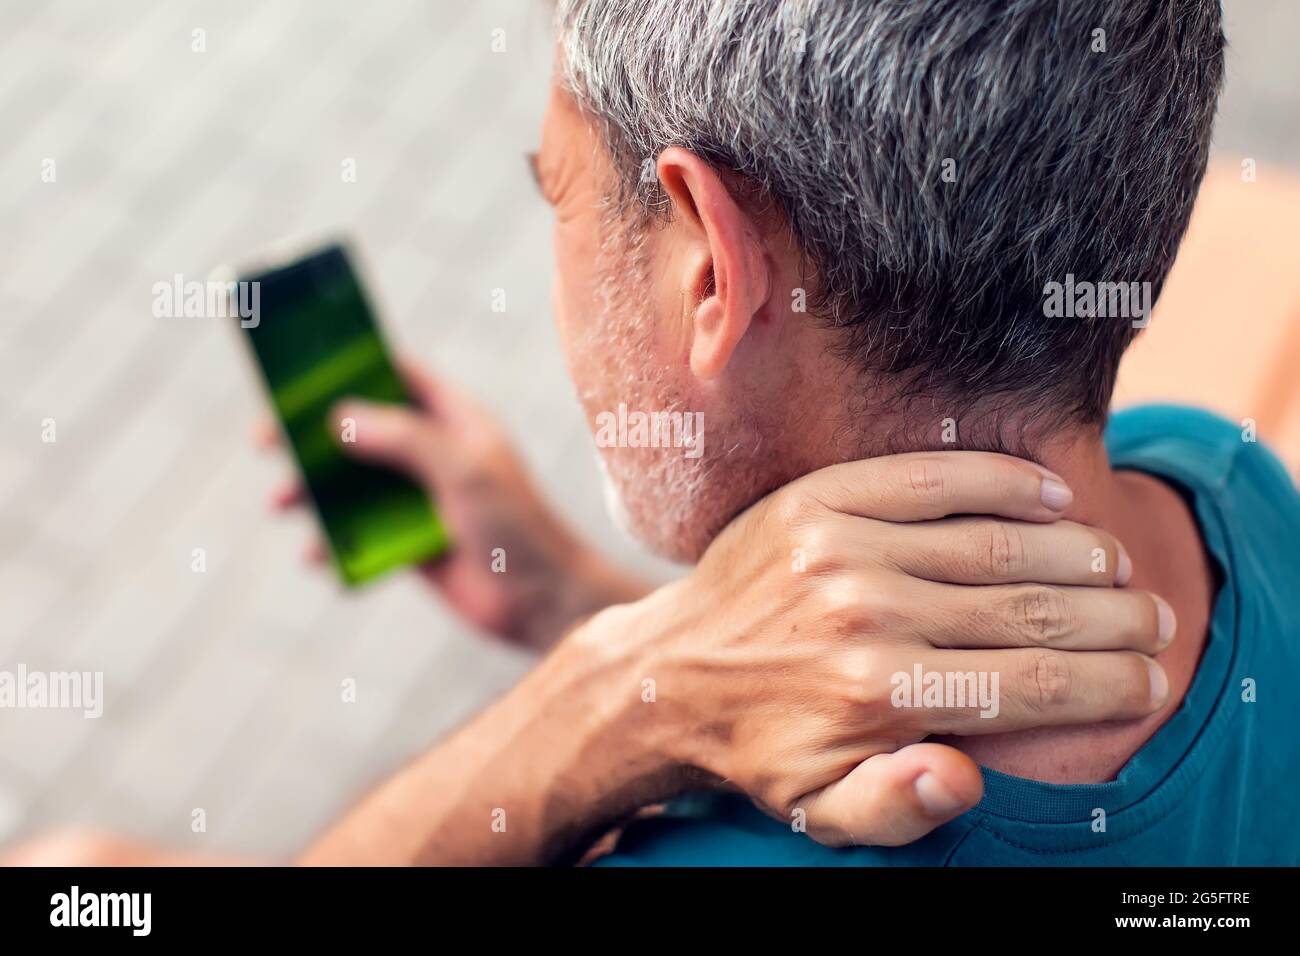 Neck pain using smartphone outdoor. Healthcare, lifestyle and technology concept Stock Photo